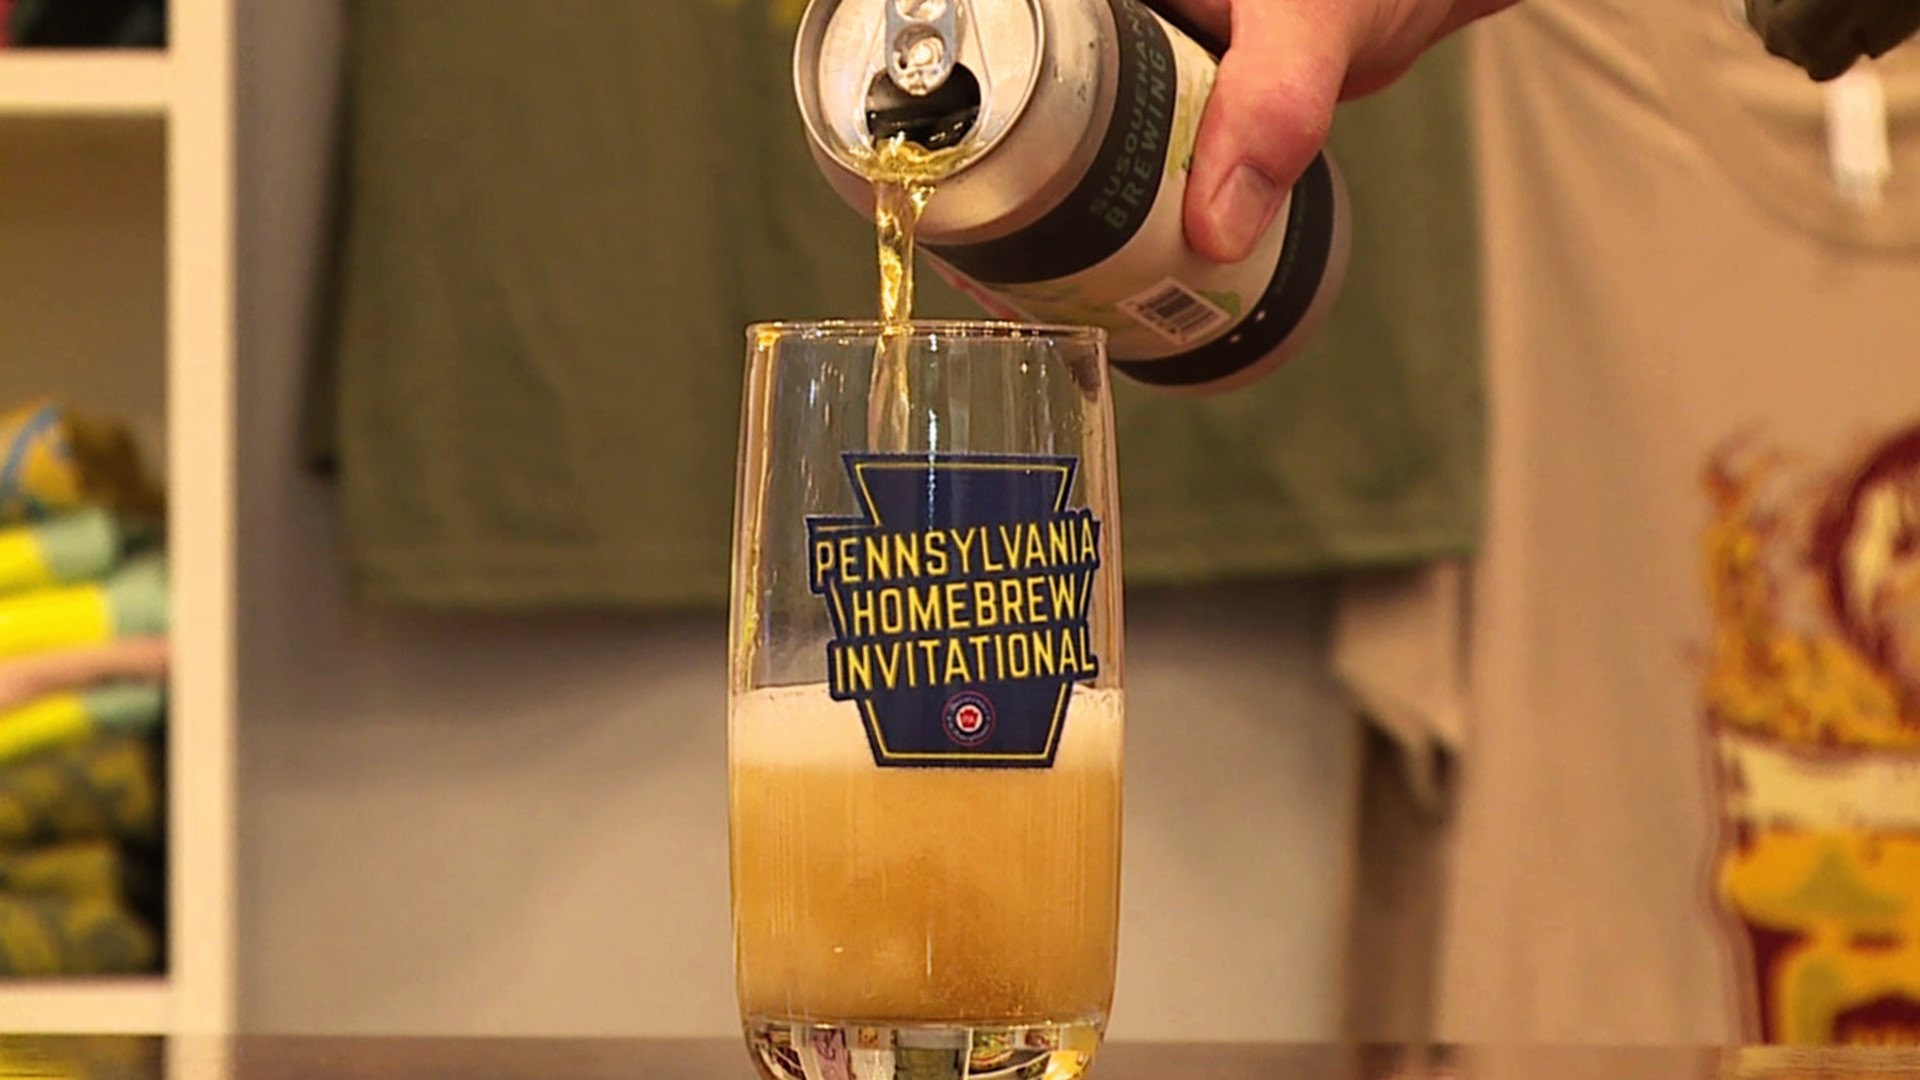 Local brewers are sharing their craft this weekend in the second annual Pennsylvania Homebrew Invitational.